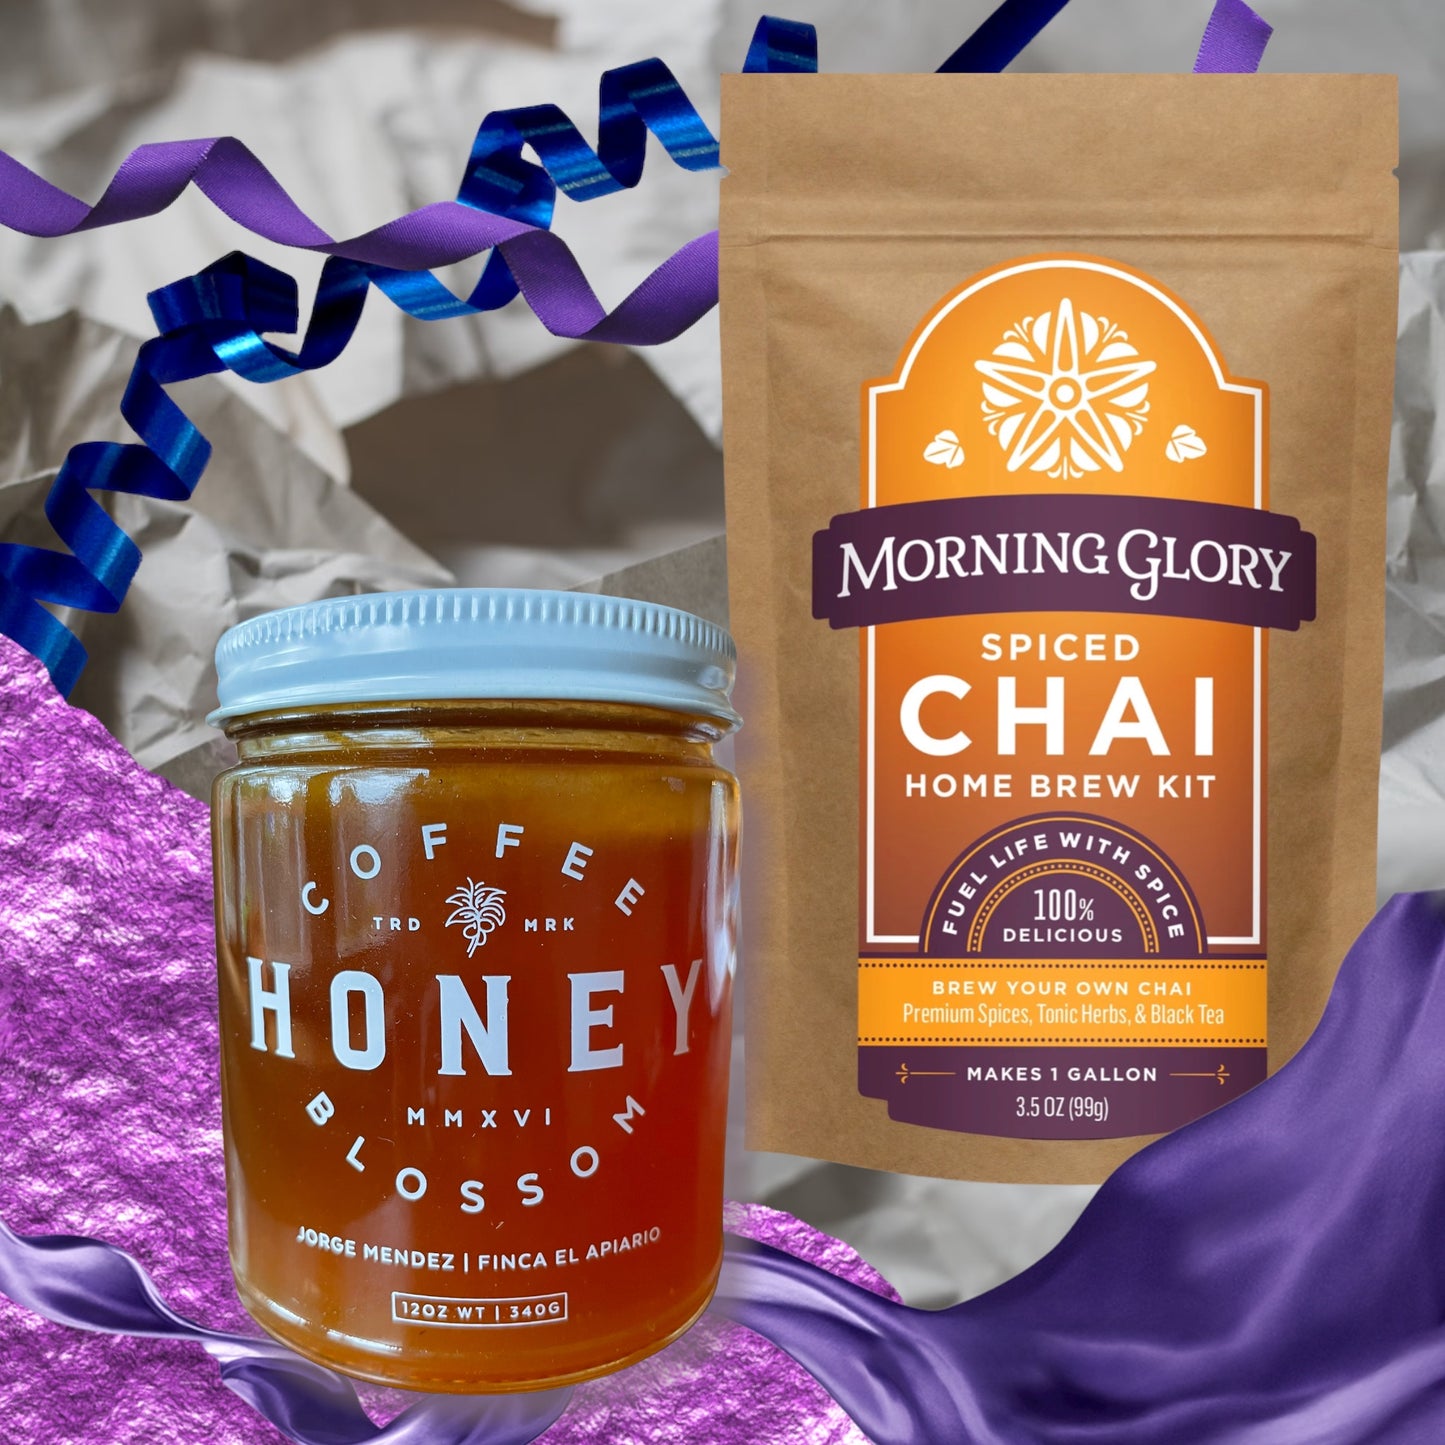 Jar of Coffee Blossom Honey and Spiced Chai Home Brew Kit 3.5 oz loose leaf chai brewing kit on festive background